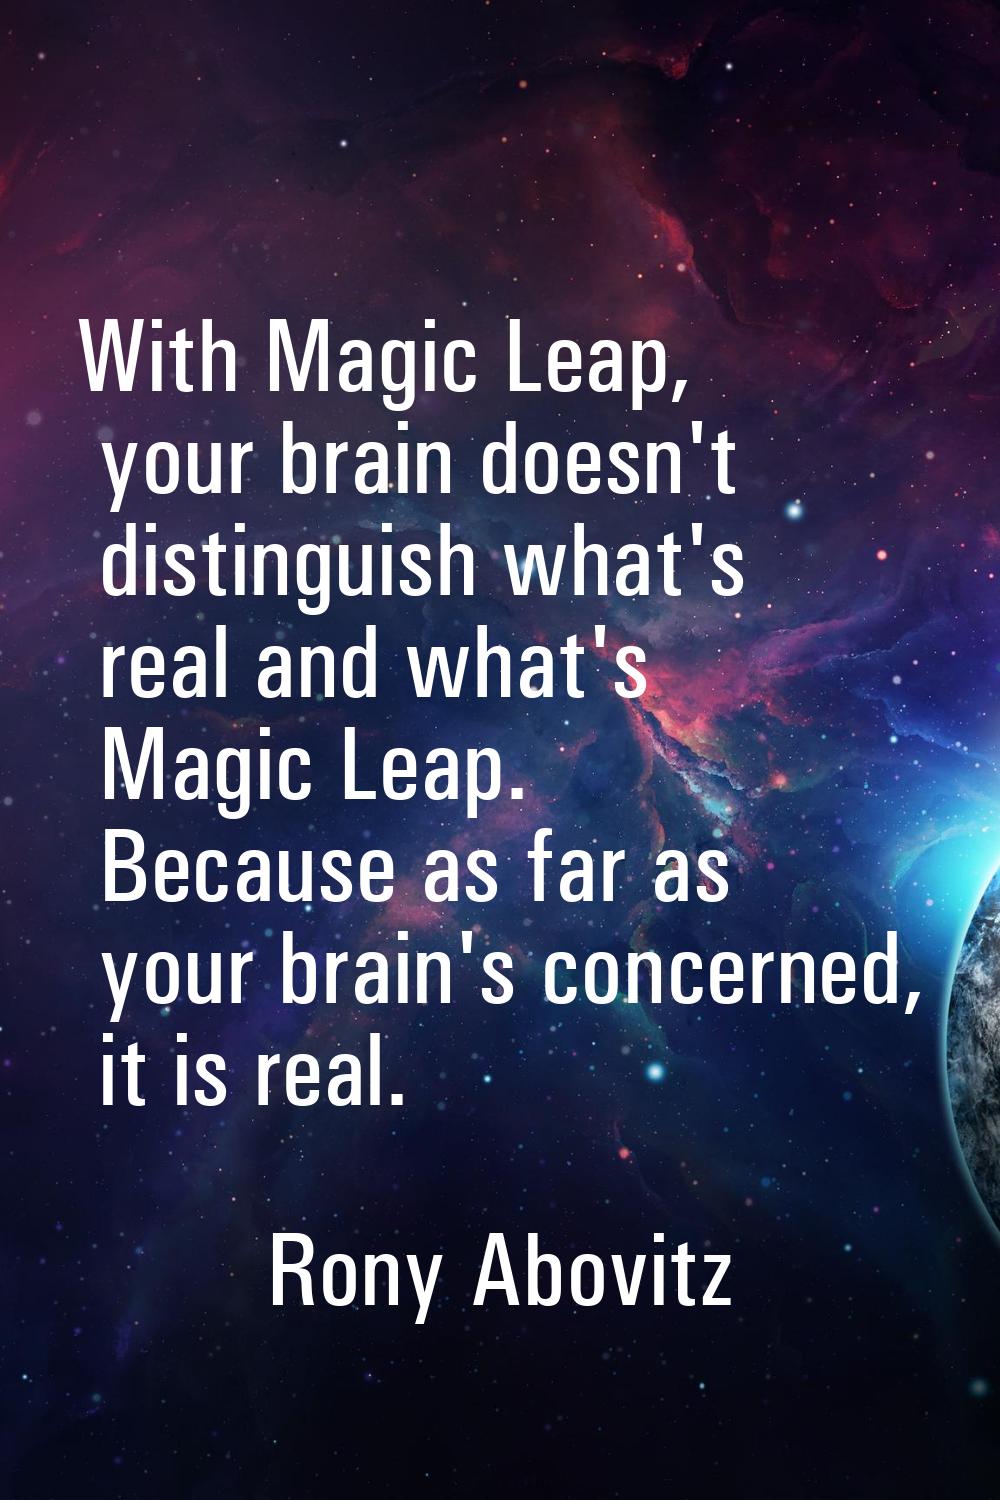 With Magic Leap, your brain doesn't distinguish what's real and what's Magic Leap. Because as far a